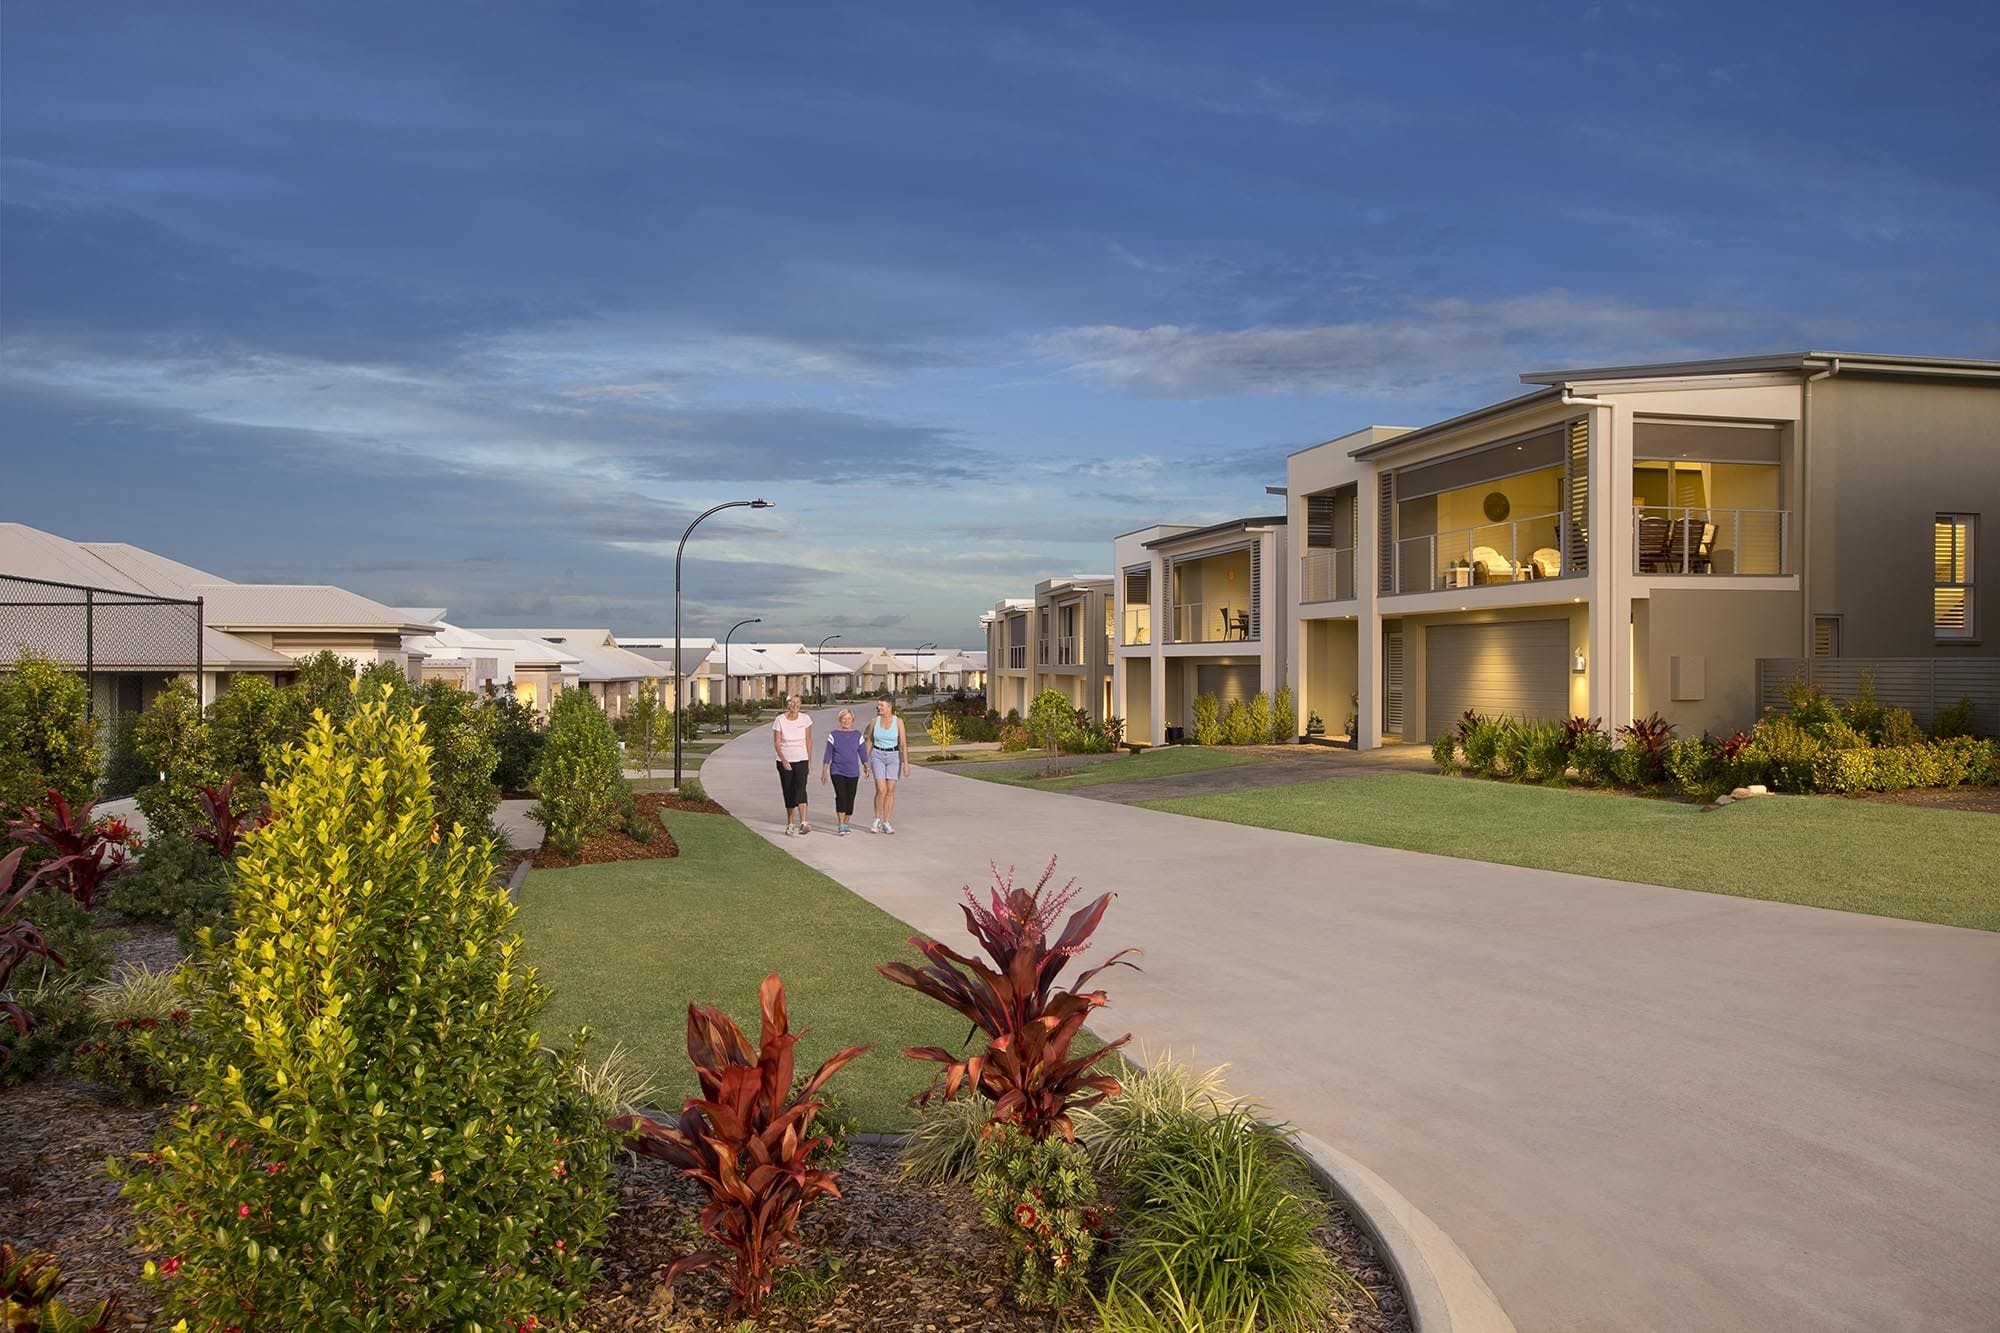 Stockland acquires lifestyle villages operator Halcyon Group for $620 million